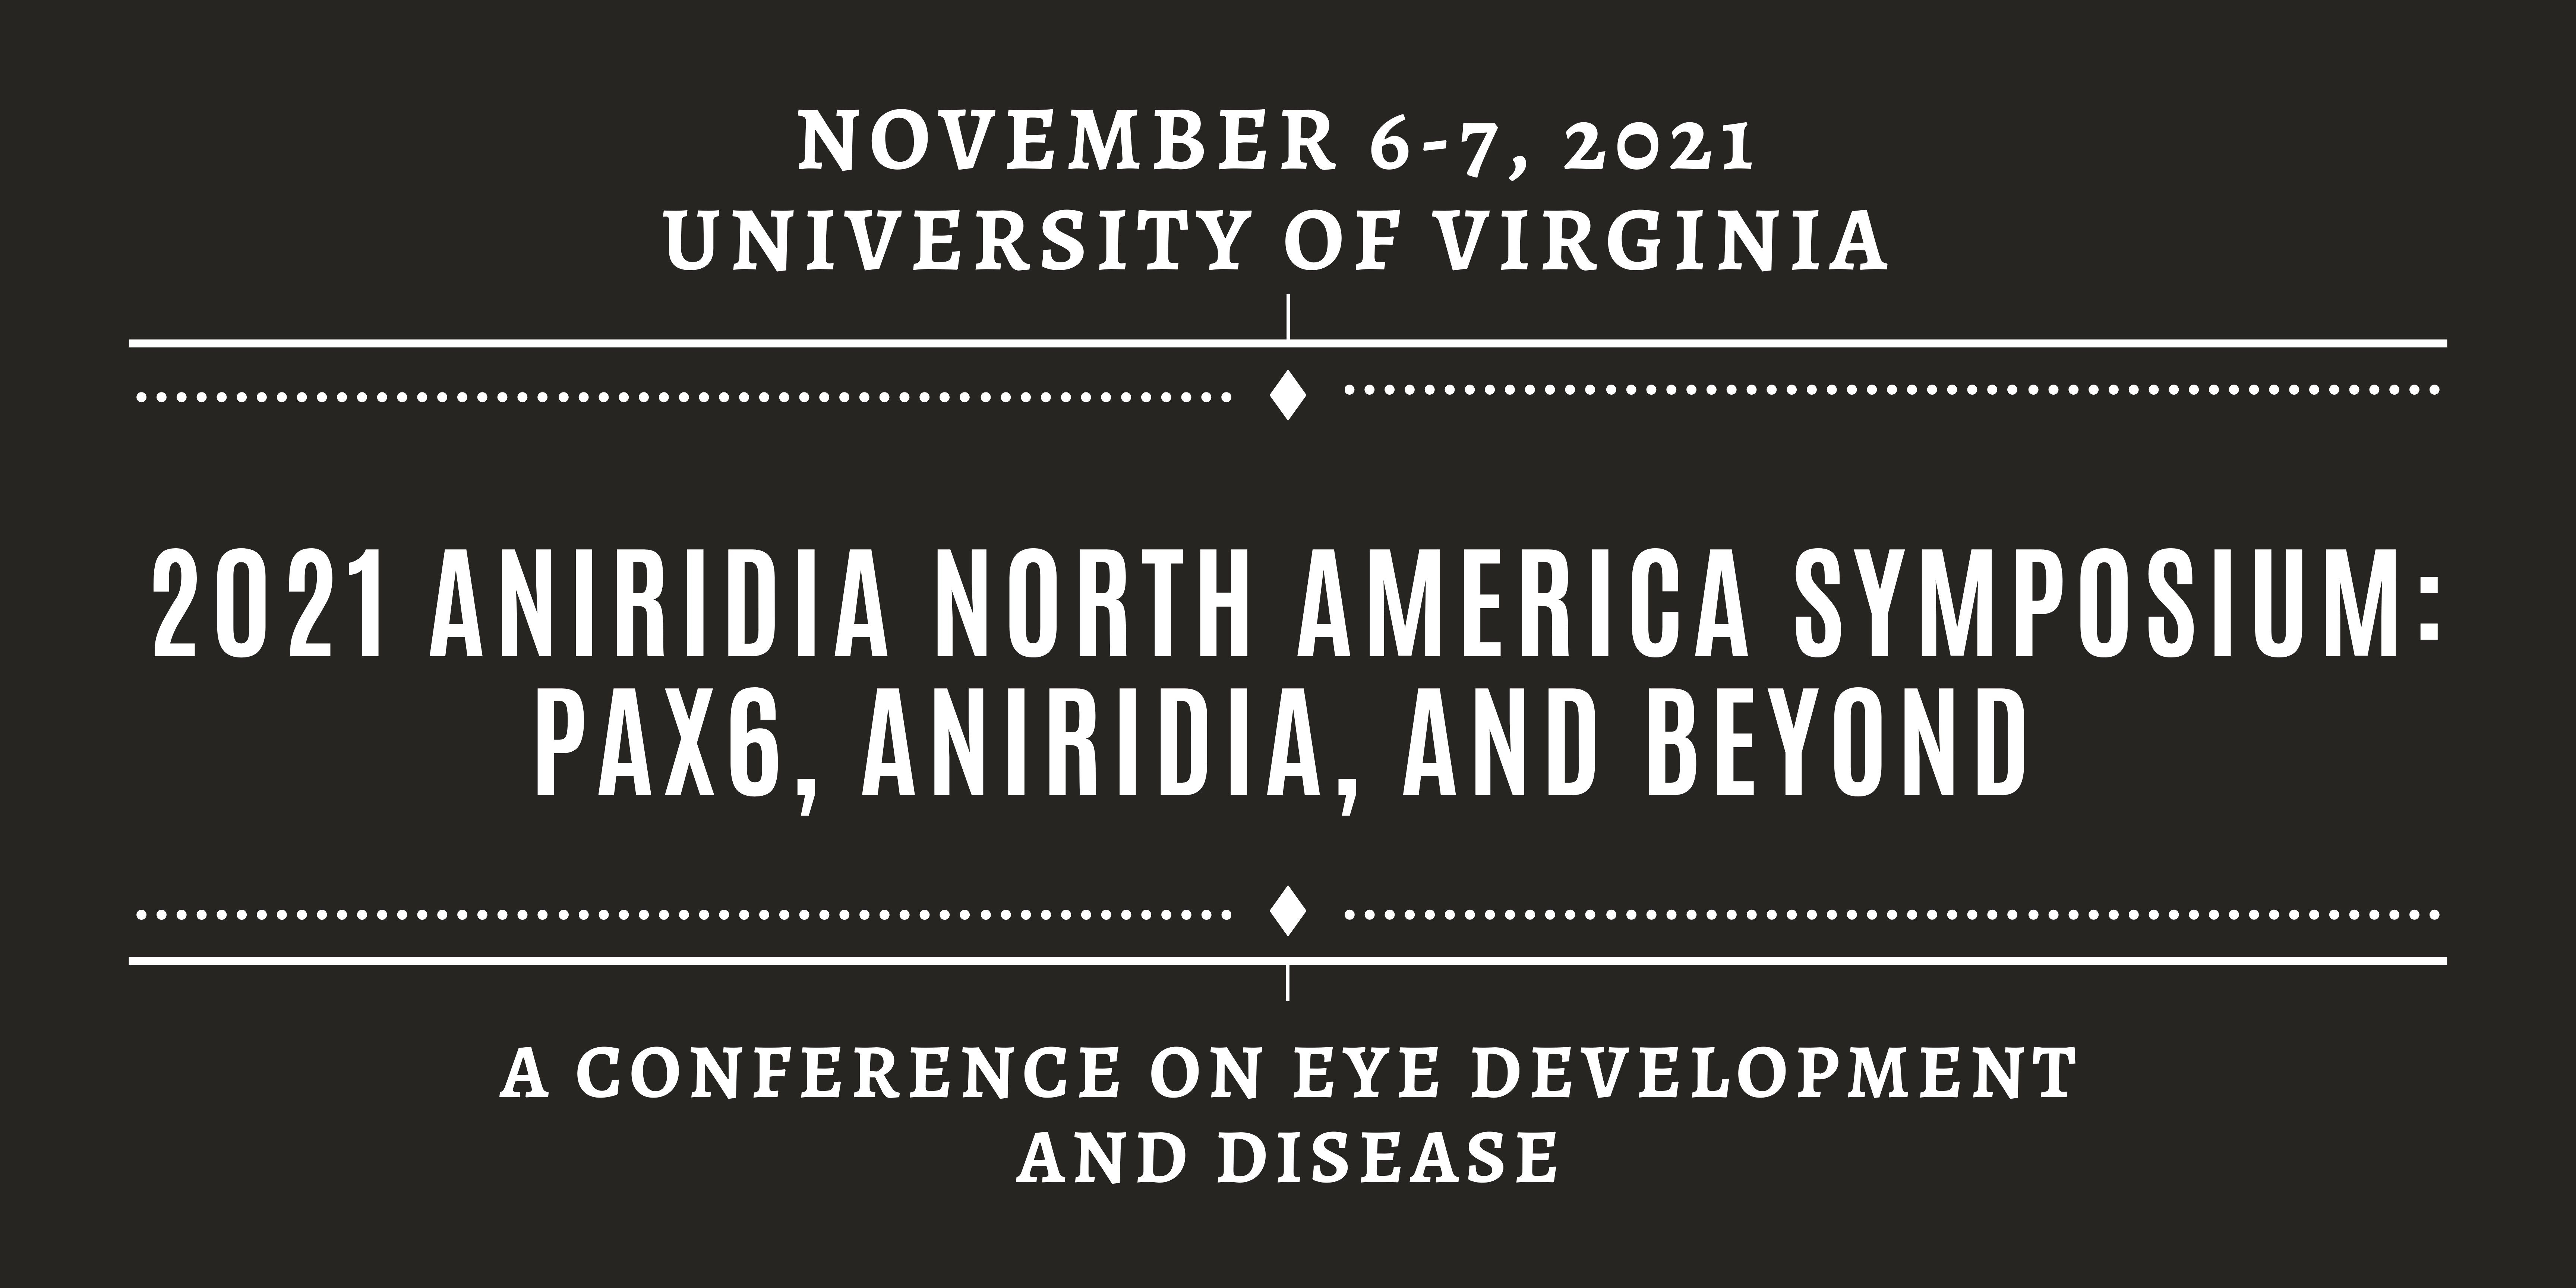 Banner showing information about 2021 ANA Symposium